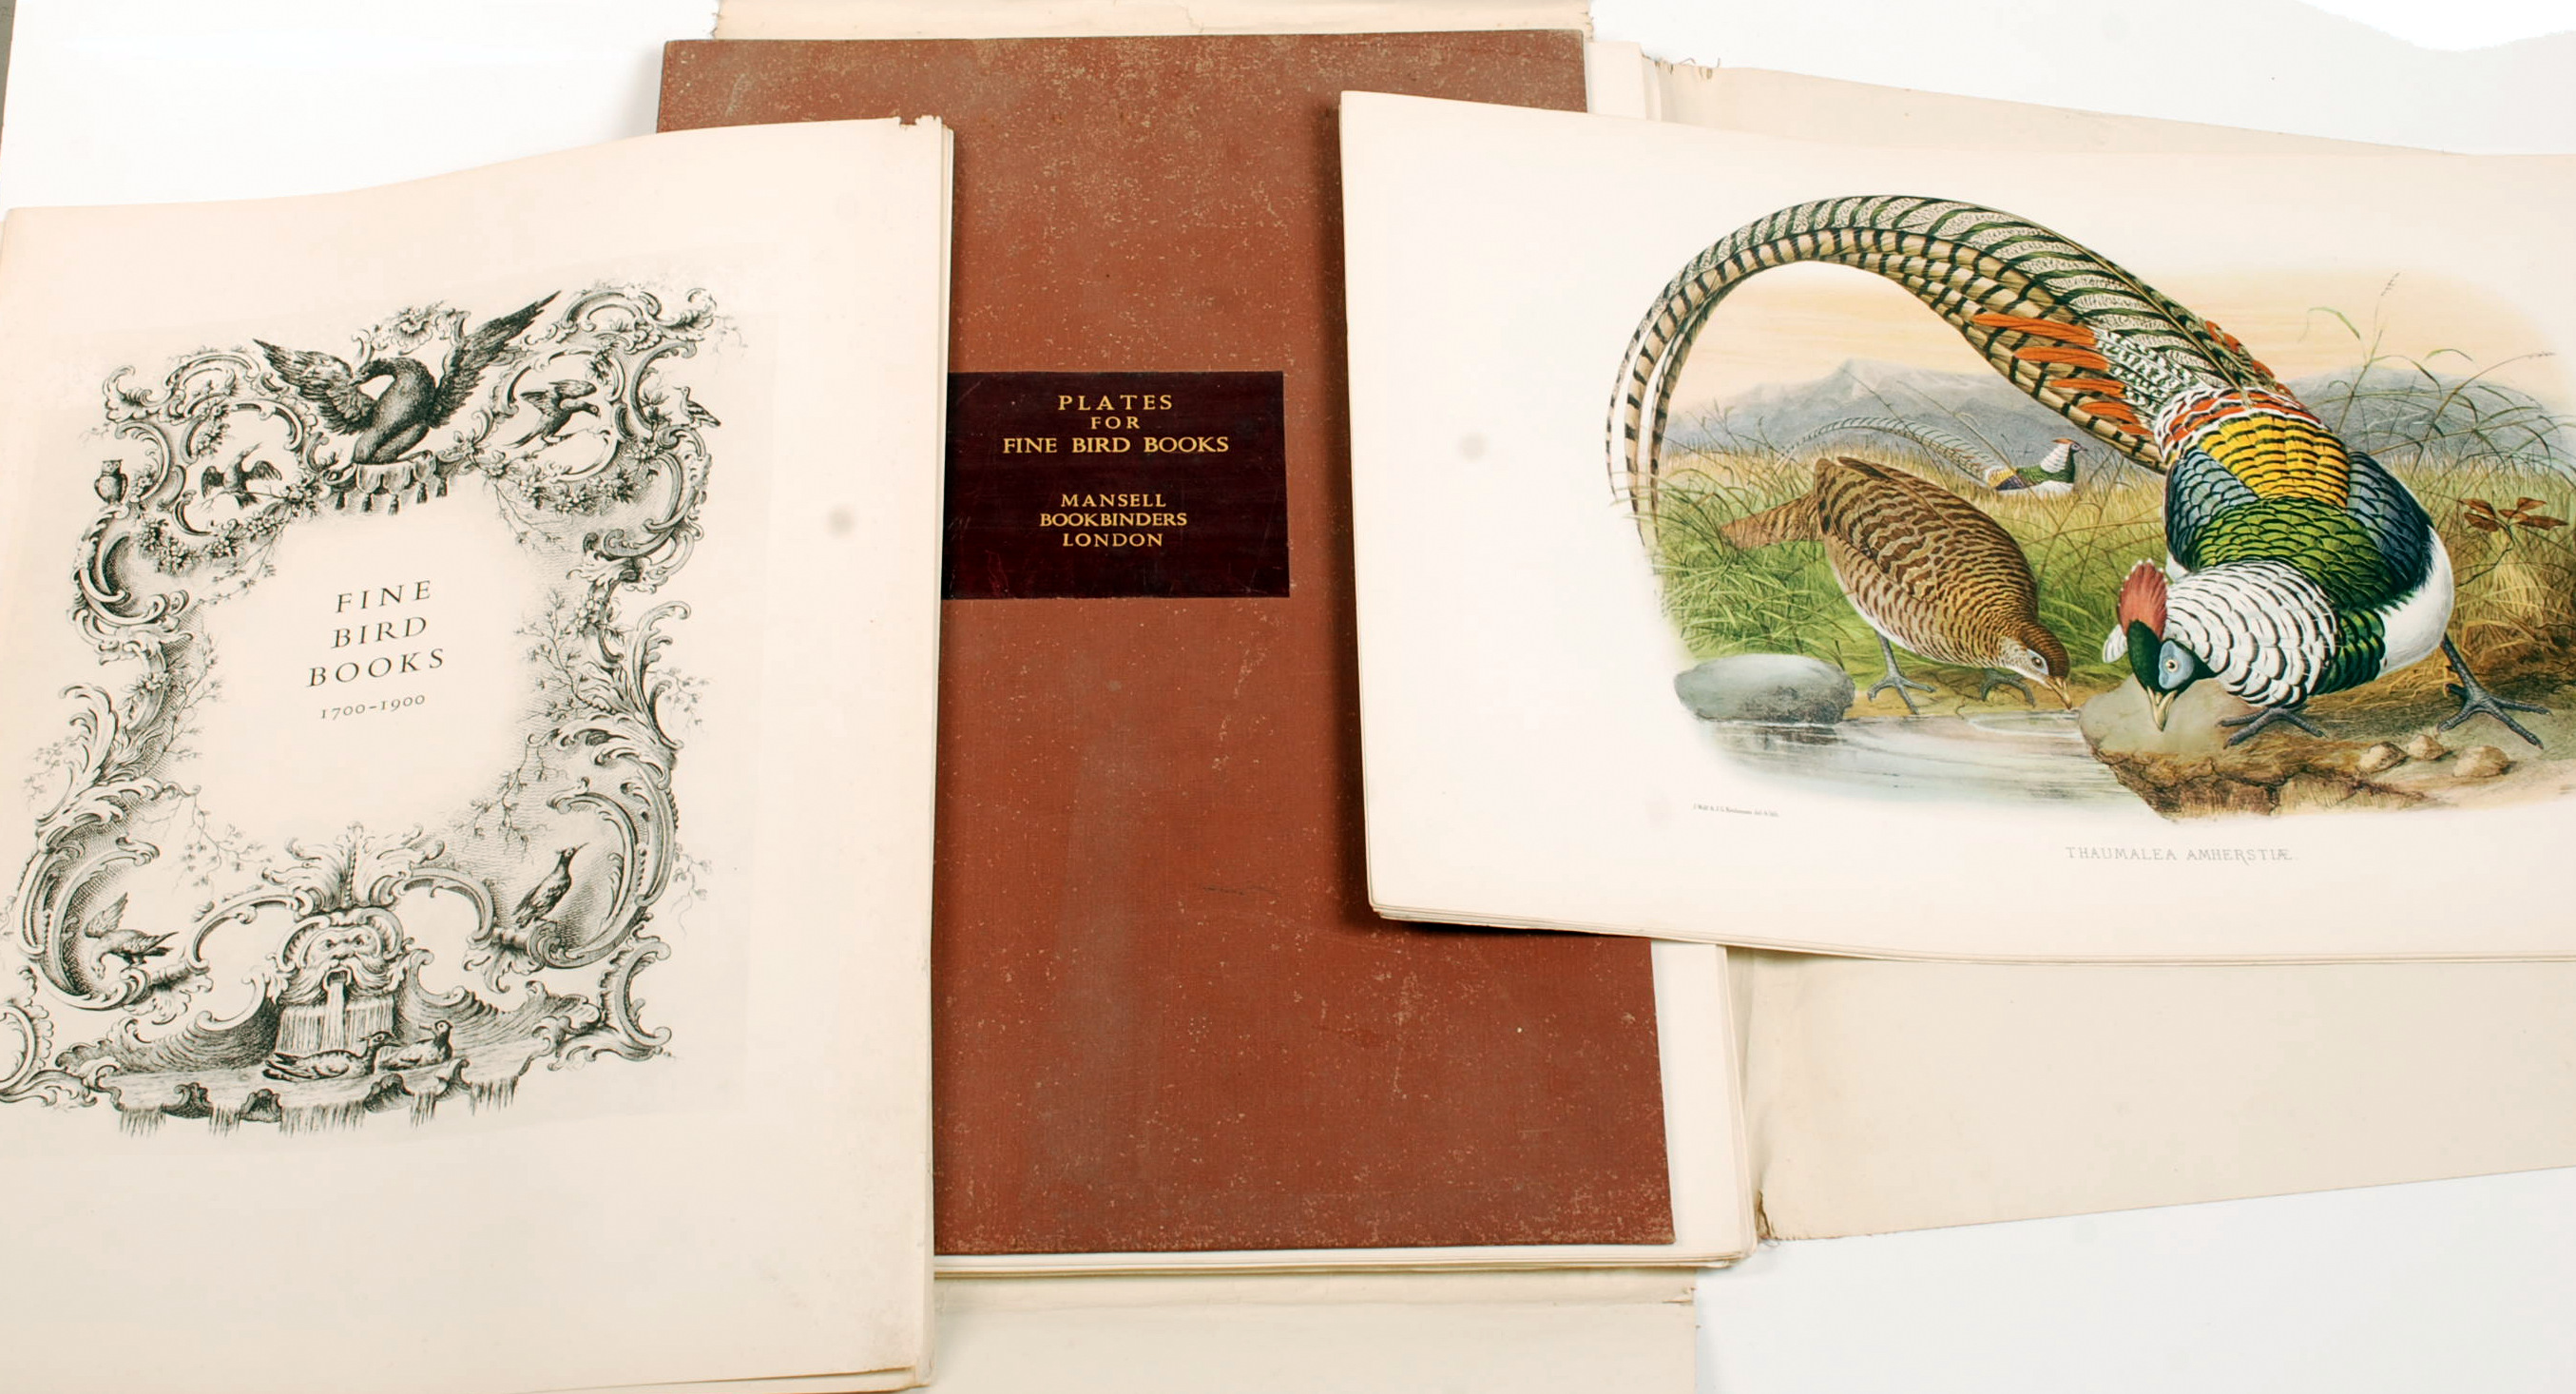 A folder of "Plates for Fine Bird Books" by Mansell Bookbinders, London.